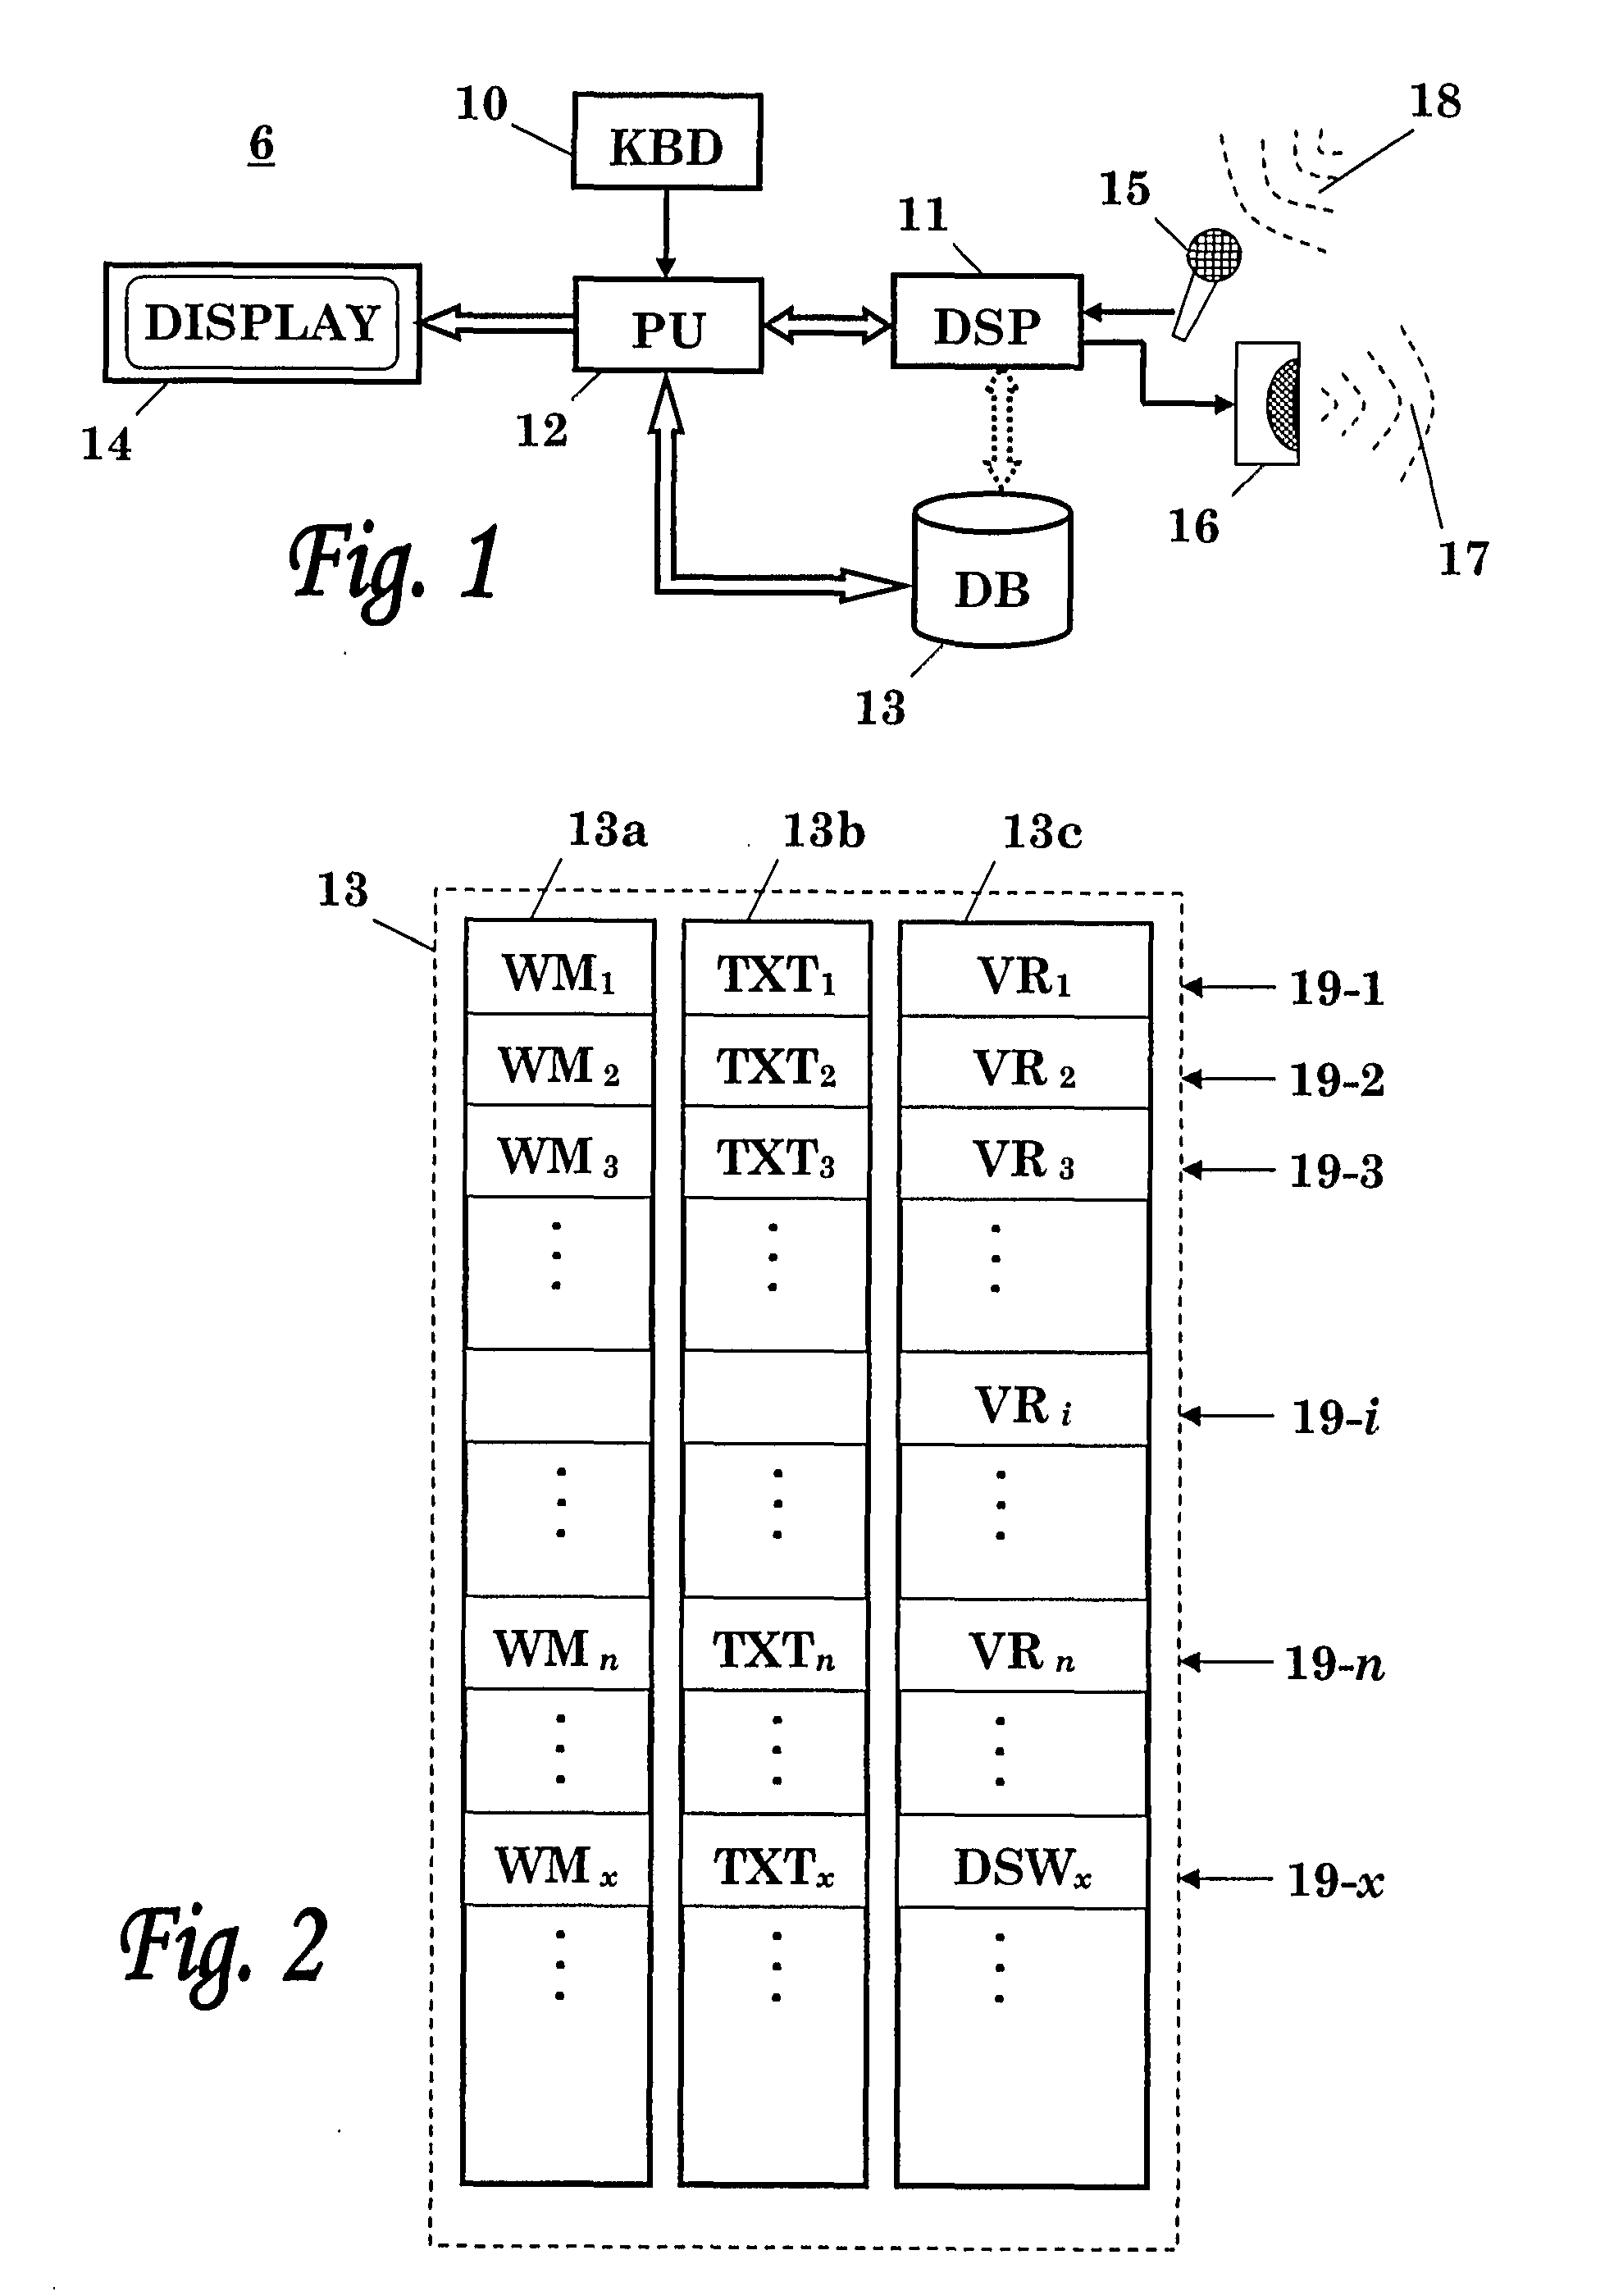 System and Method for Correcting Speech